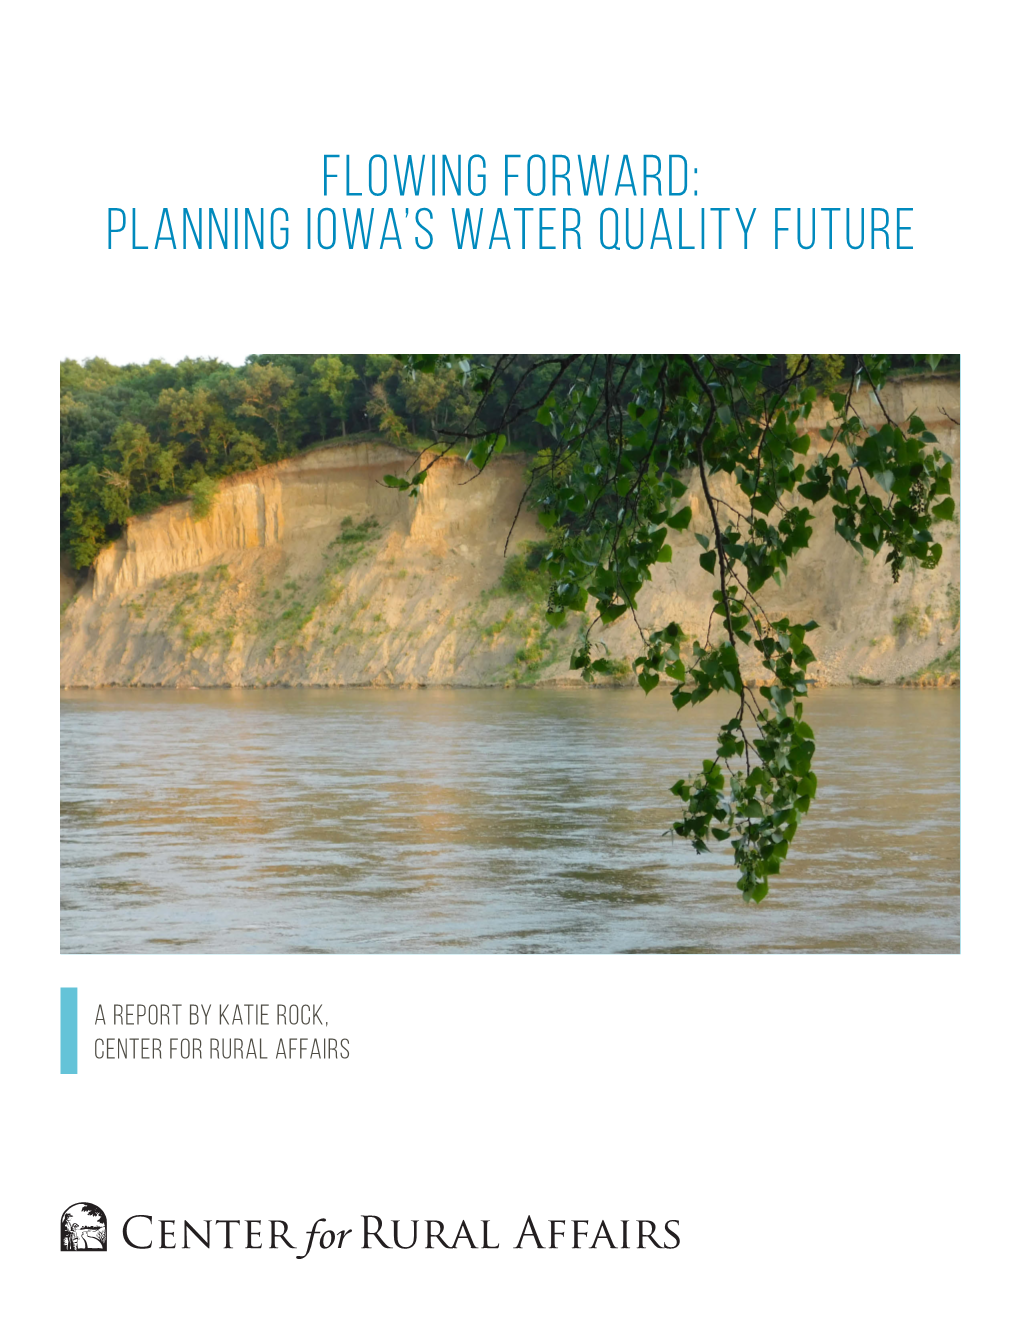 Flowing Forward: Planning Iowa's Water Quality Future